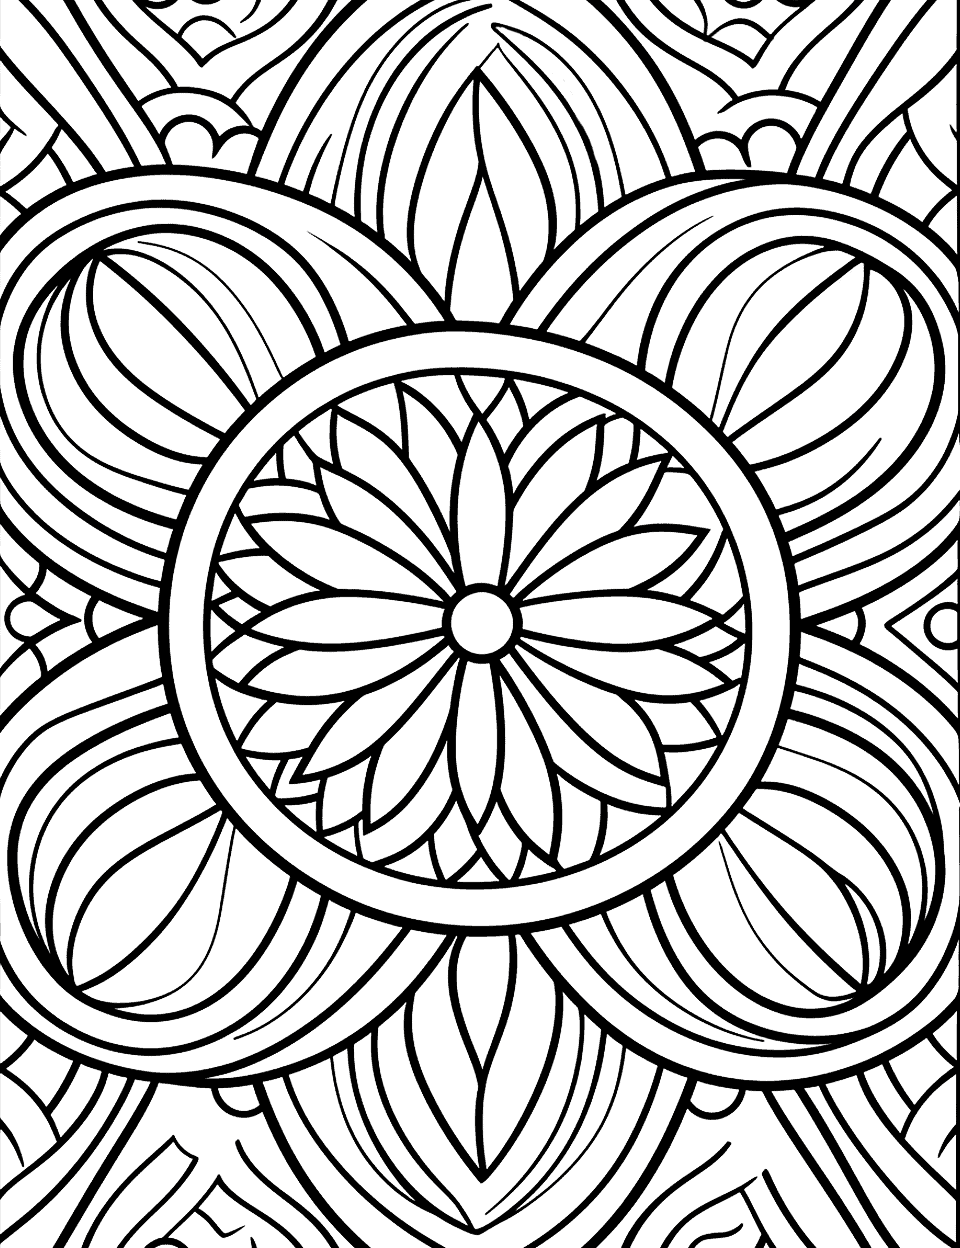 Pinterest Patterns Adult Coloring Page - A coloring page inspired by trendy patterns found on Pinterest, like mandalas and geometric shapes.